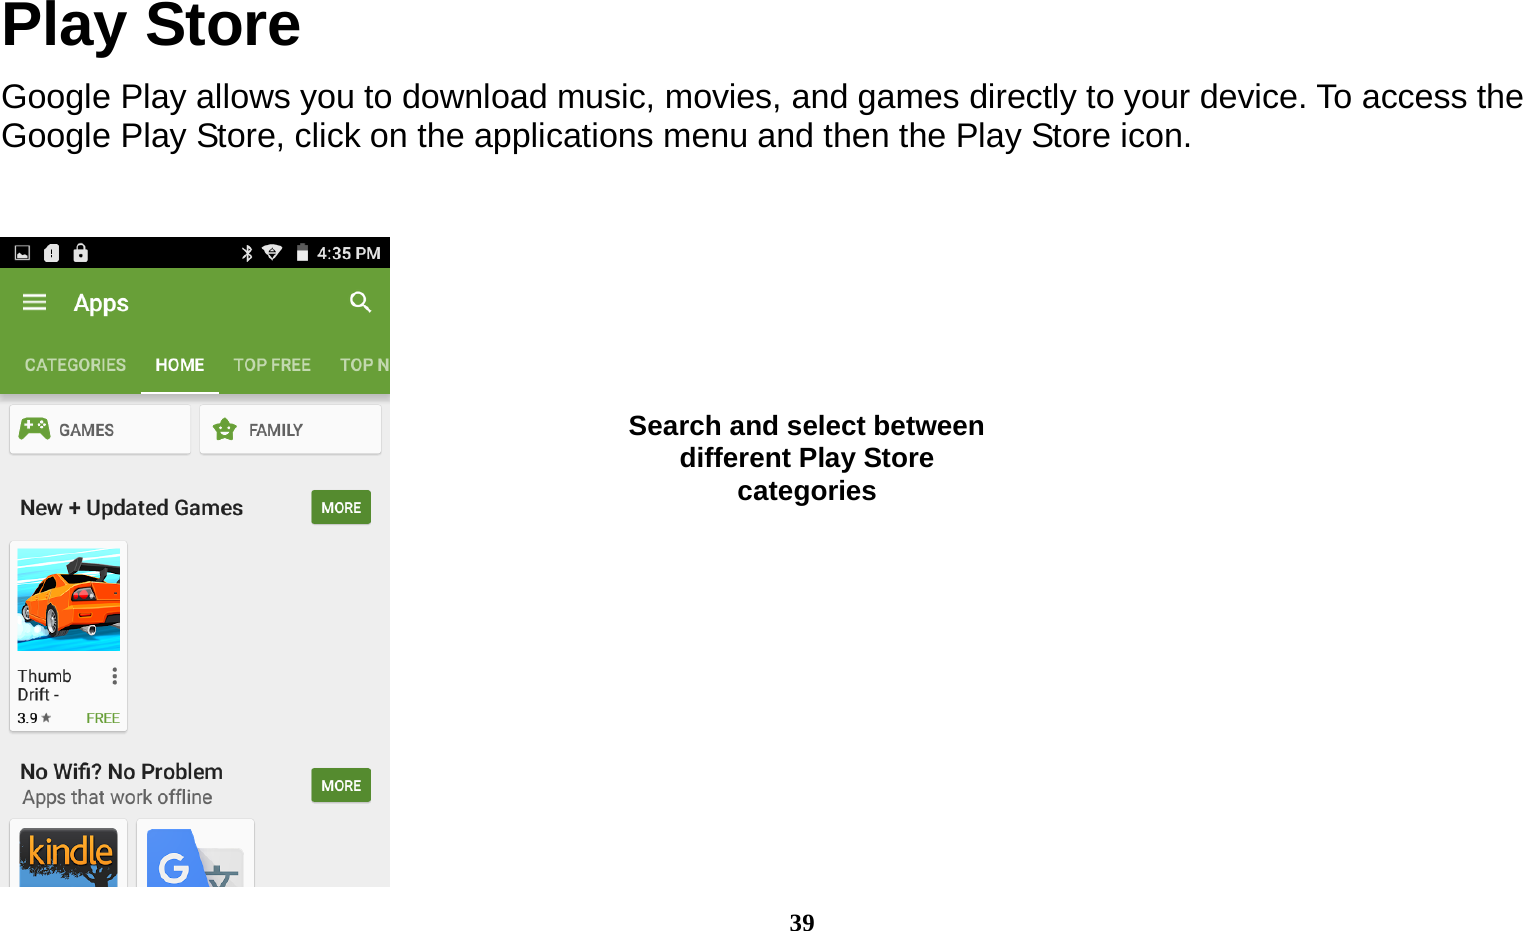  39 Play Store Google Play allows you to download music, movies, and games directly to your device. To access the Google Play Store, click on the applications menu and then the Play Store icon.    Search and select between different Play Store categories 